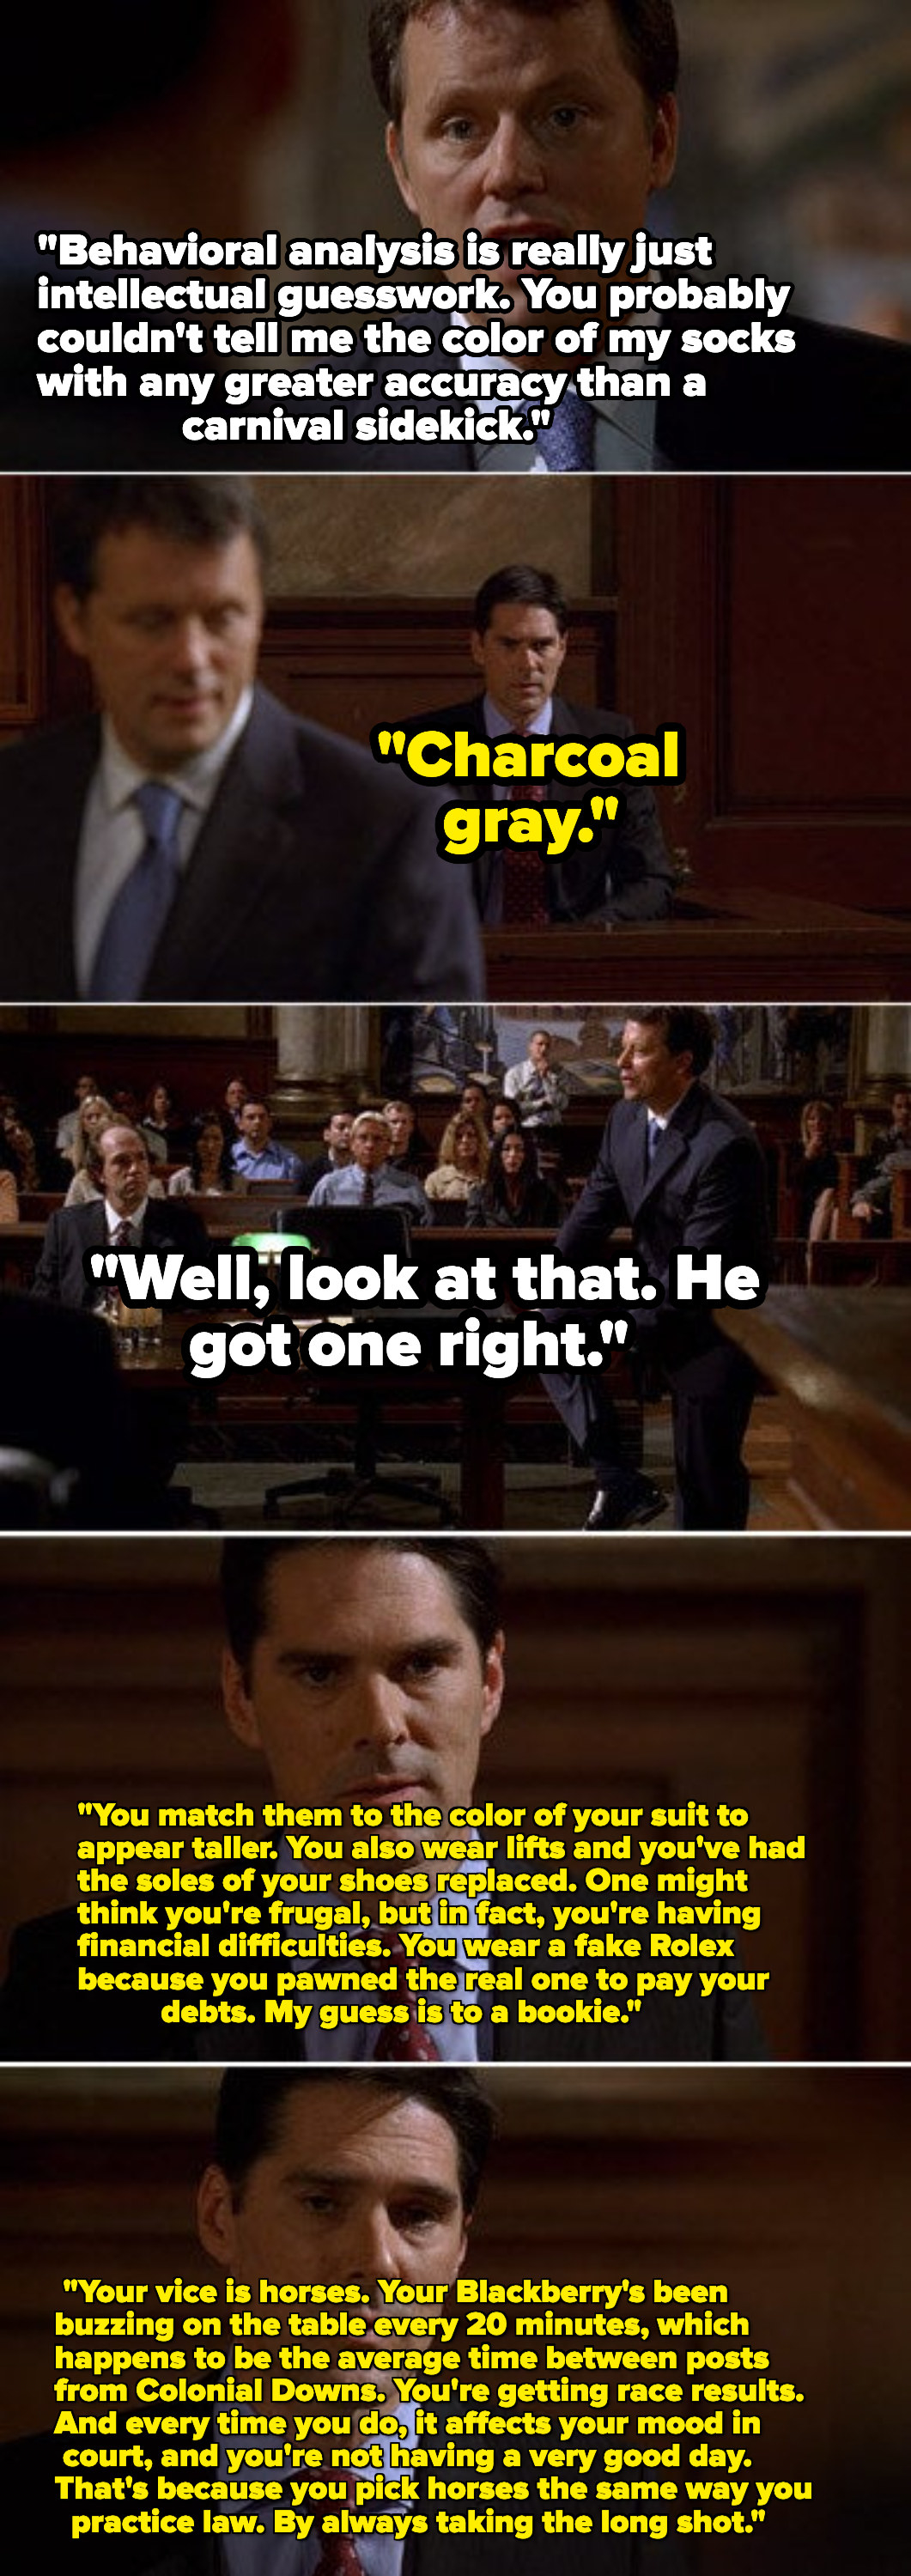 Hotch in front of a court revealing that the lawyer questioning him is in debt and betting on horses